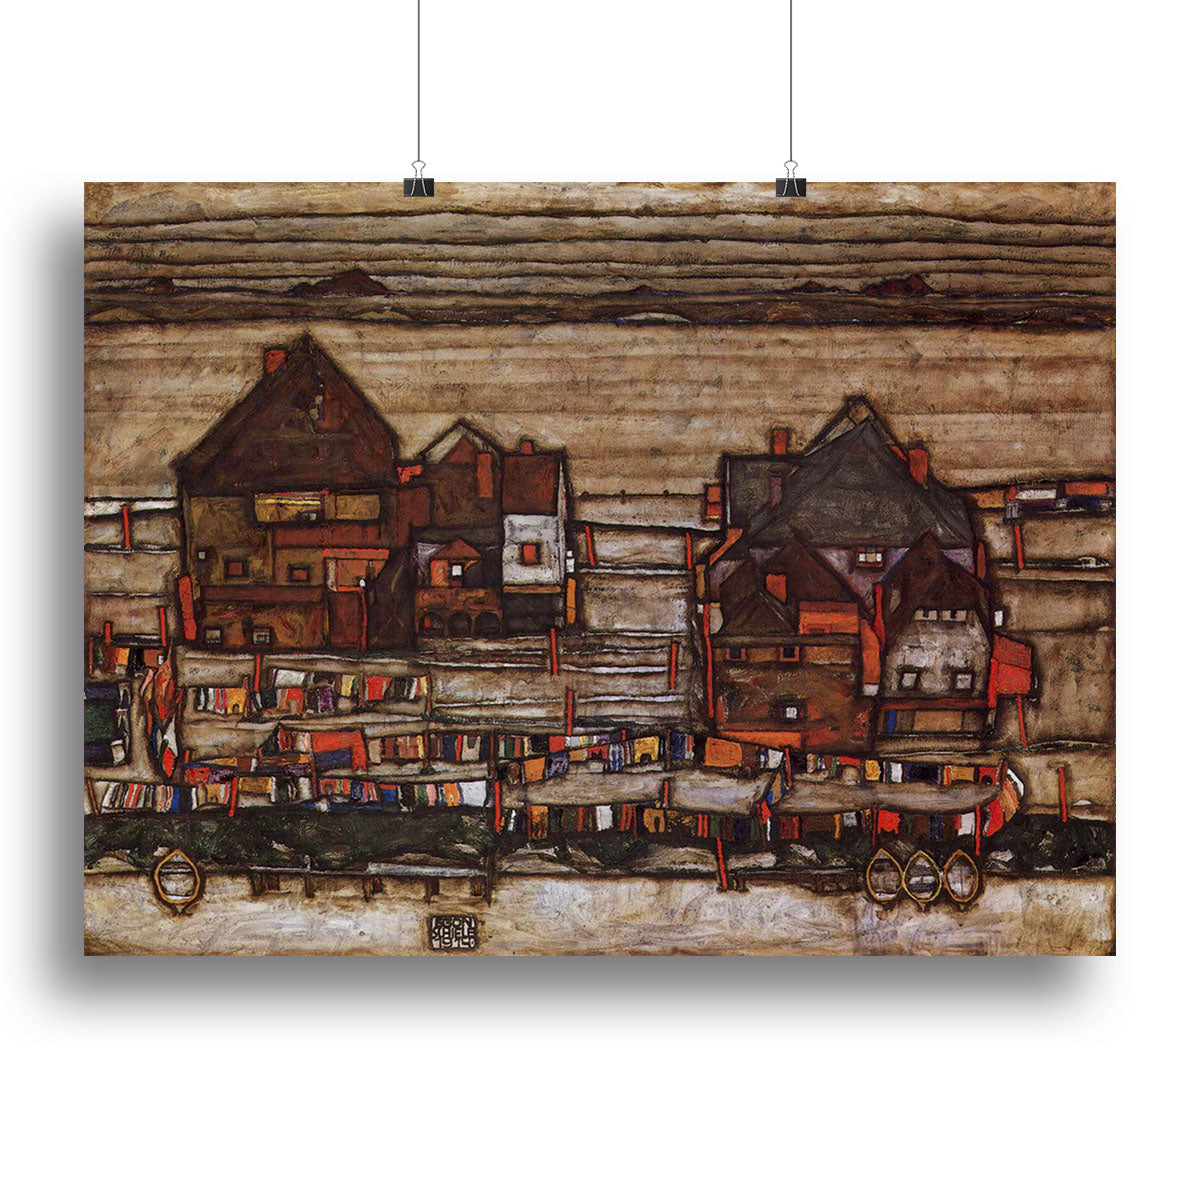 Houses with laundry lines and suburban by Egon Schiele Canvas Print or Poster - Canvas Art Rocks - 2